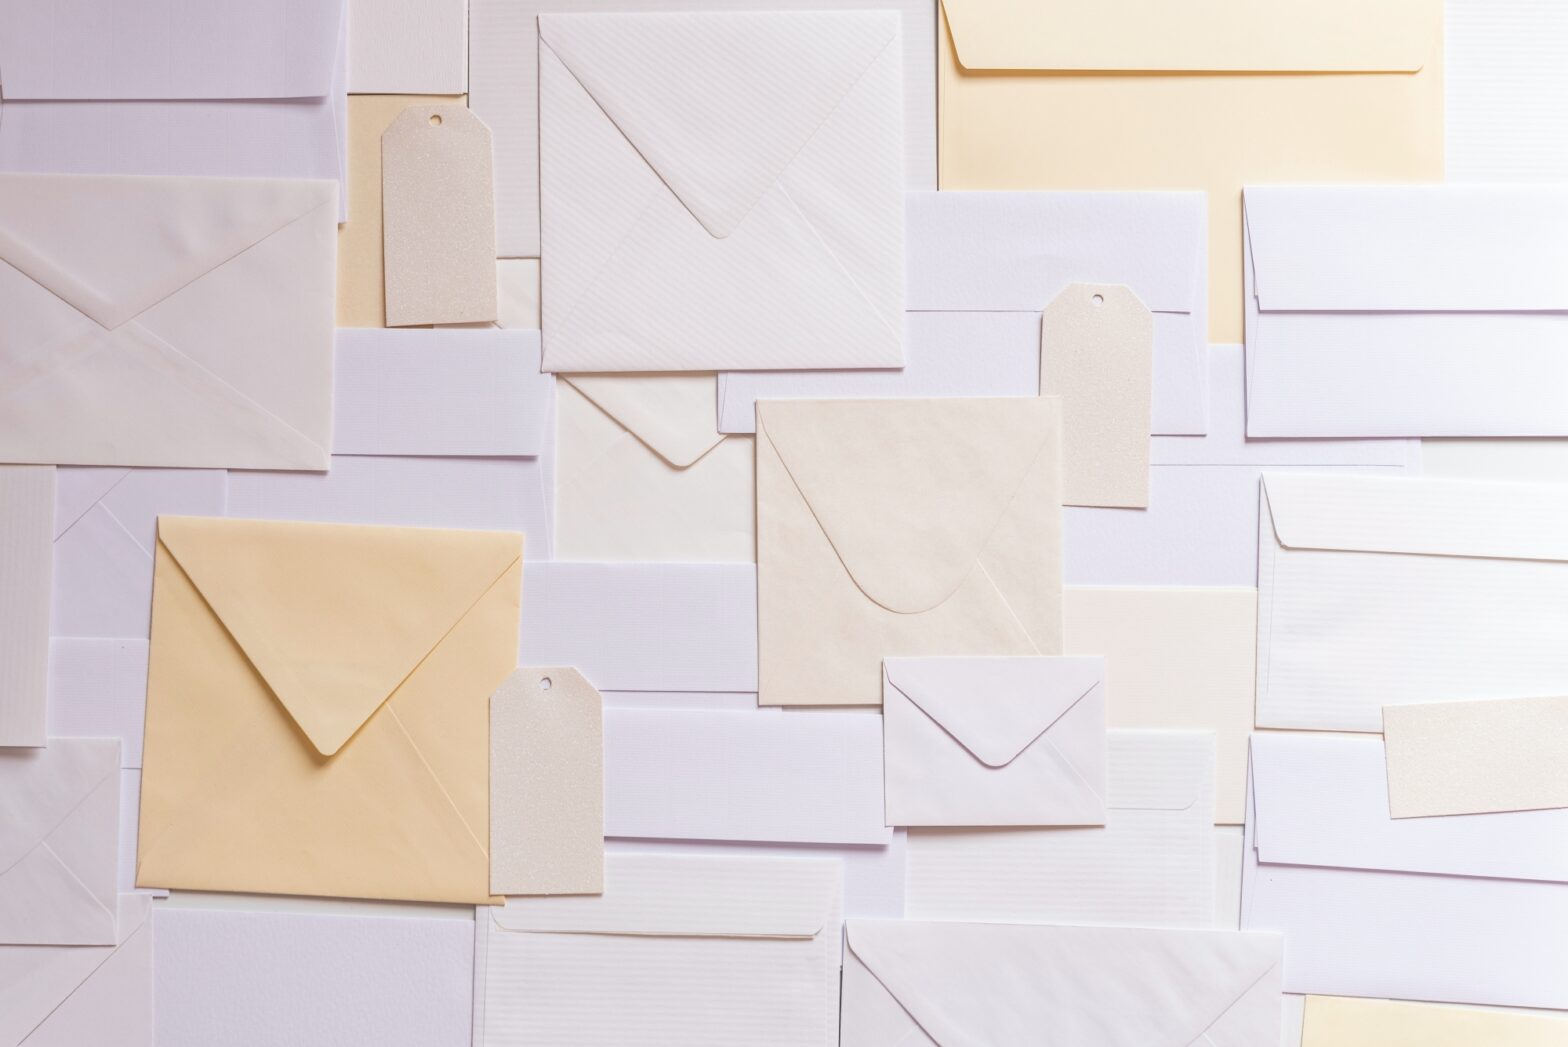 How to Think About Your Email (Un)like Your Mail